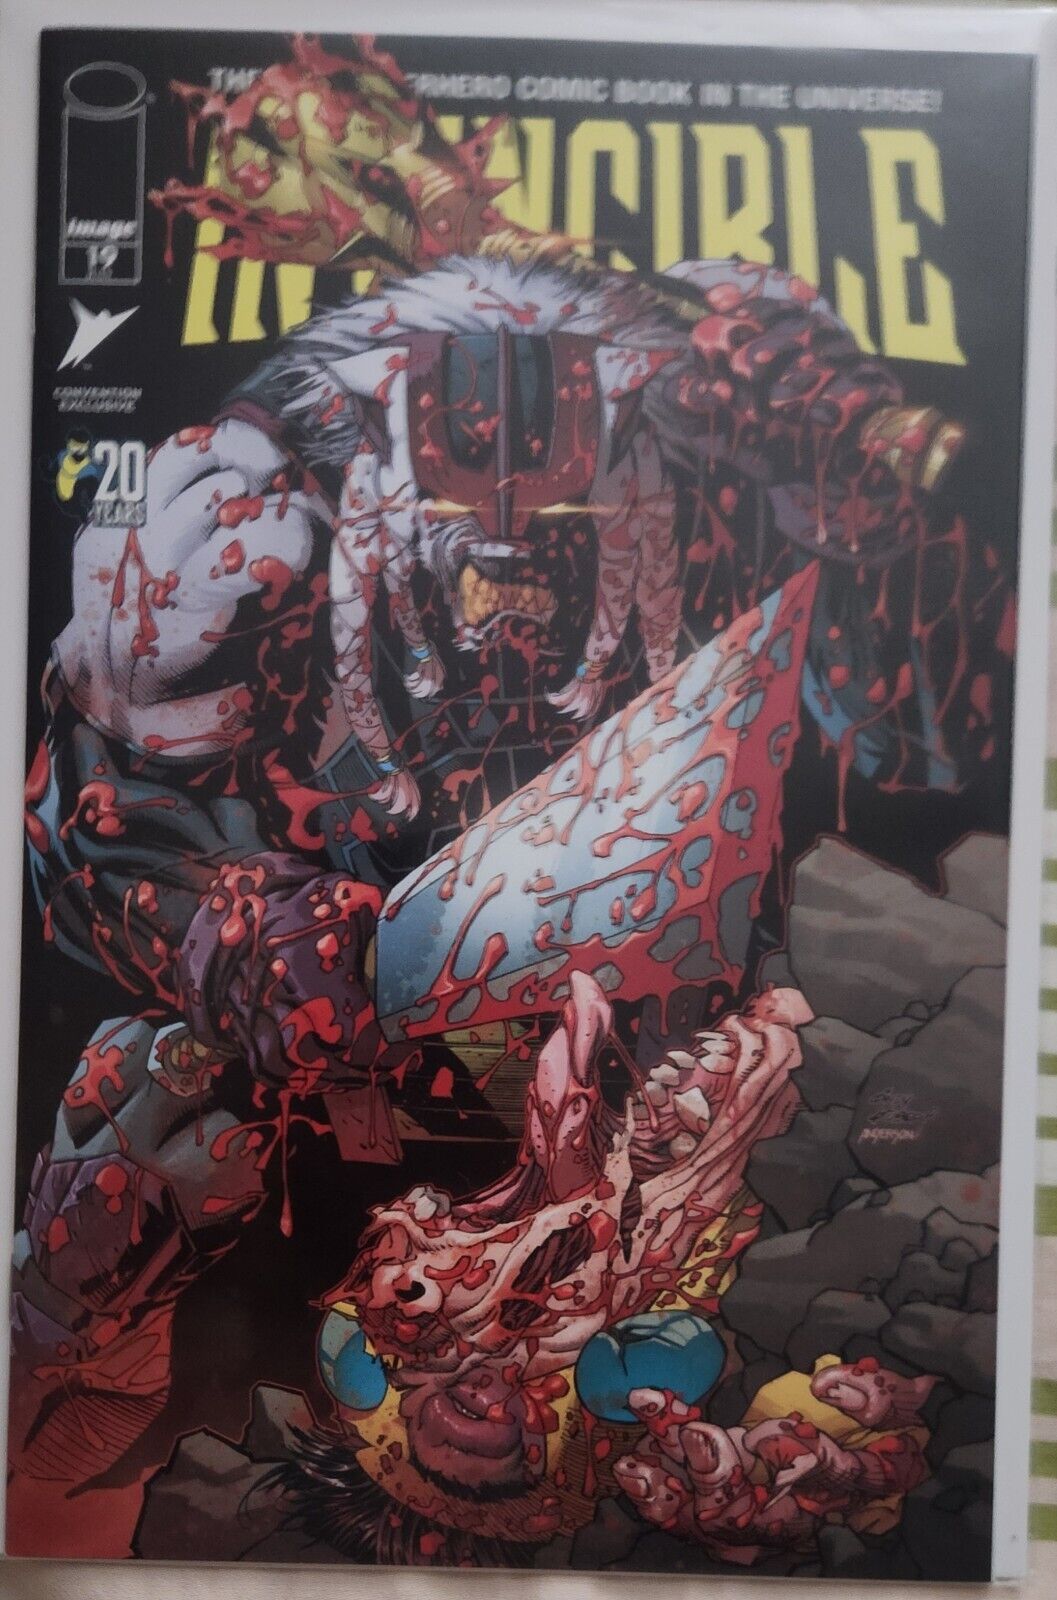  2023 Invincible #19 Andy Kubert Variant Skybound SDCC Comic Con Exclusive LE